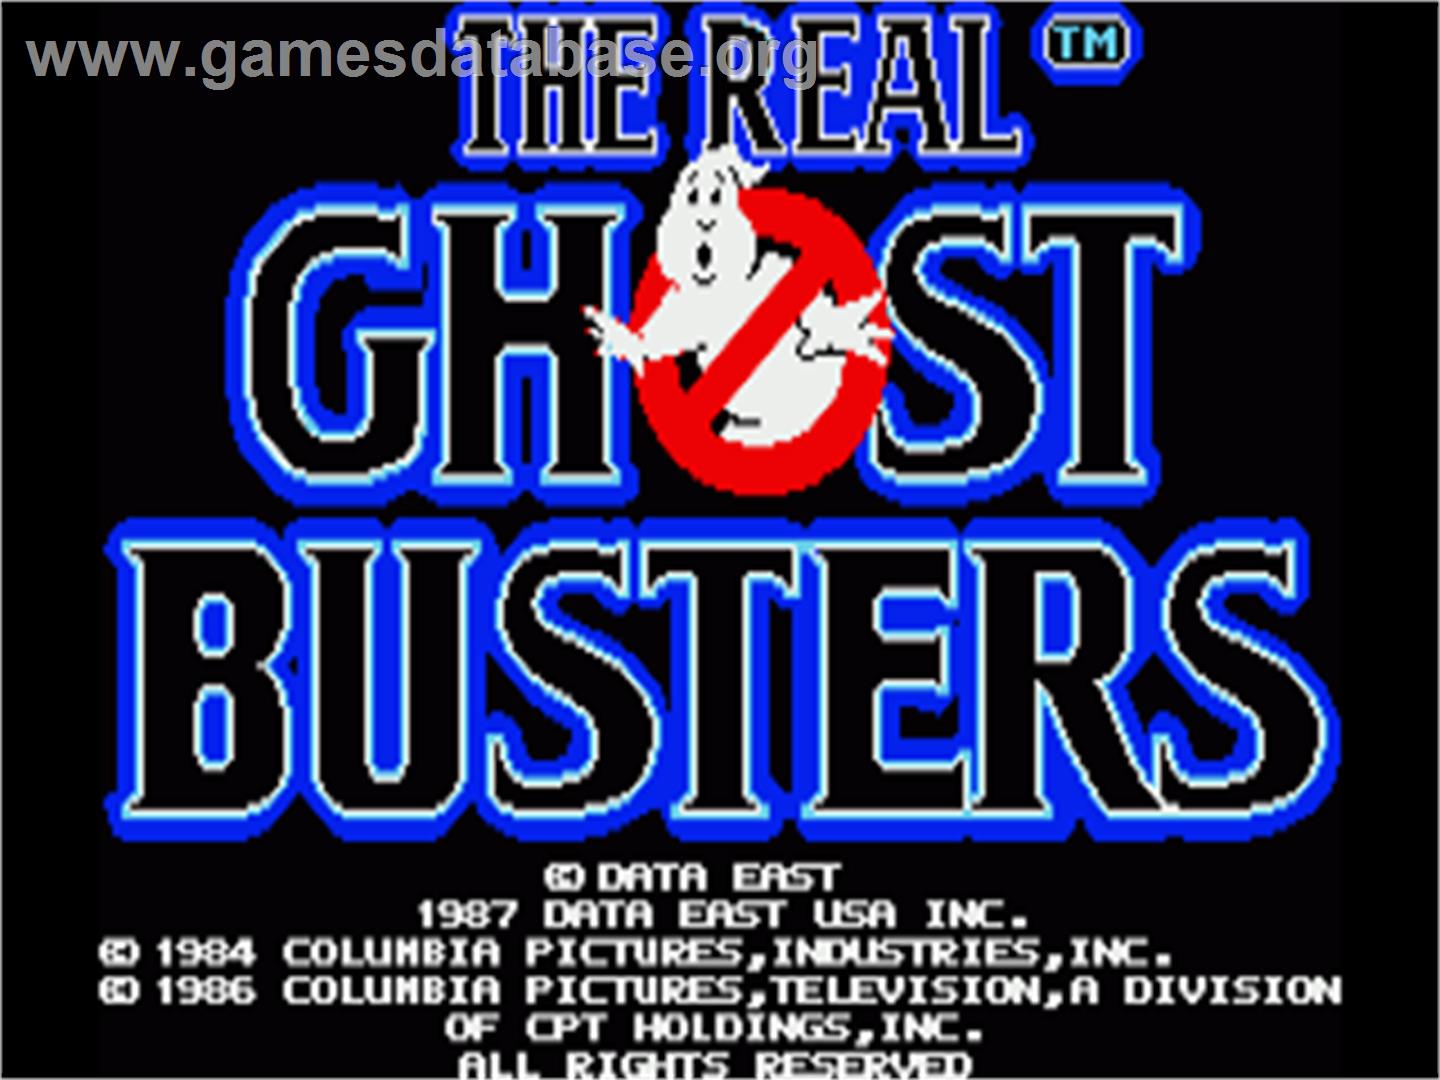 Real Ghostbusters, The - Commodore Amiga - Artwork - Title Screen